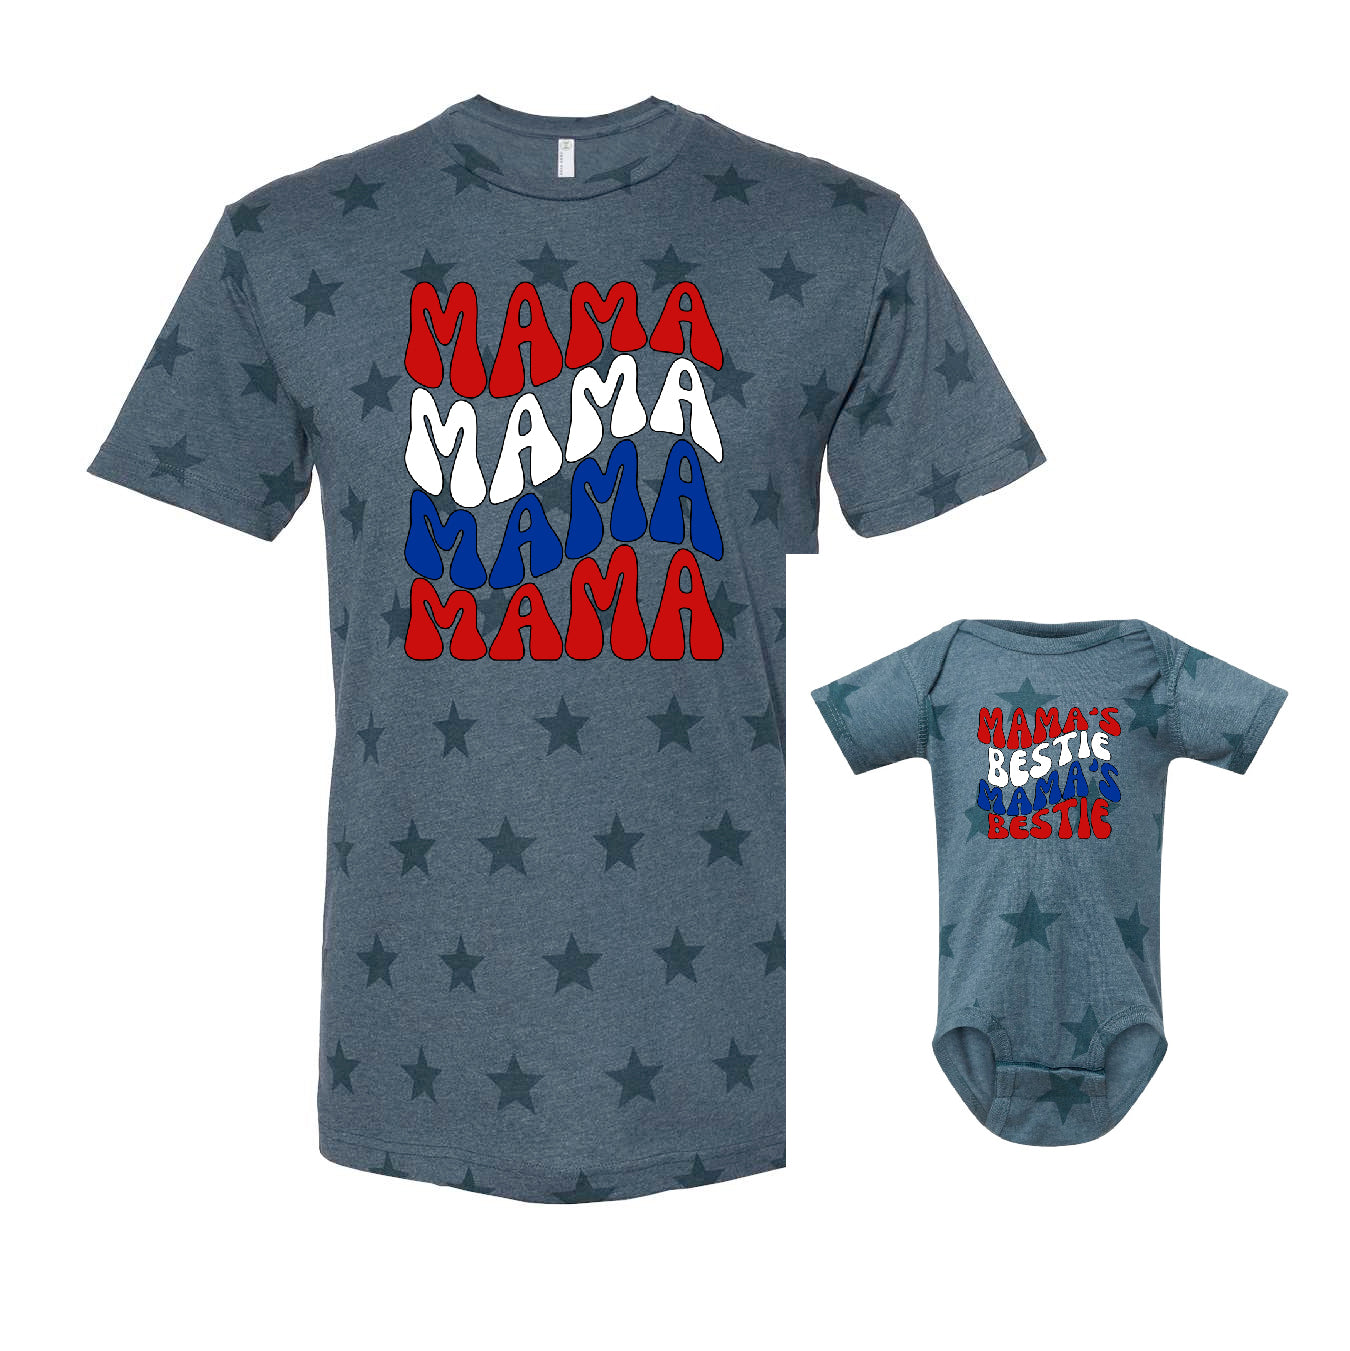 Mama Red White and Blue Retro Wavy - with patterned tee options!